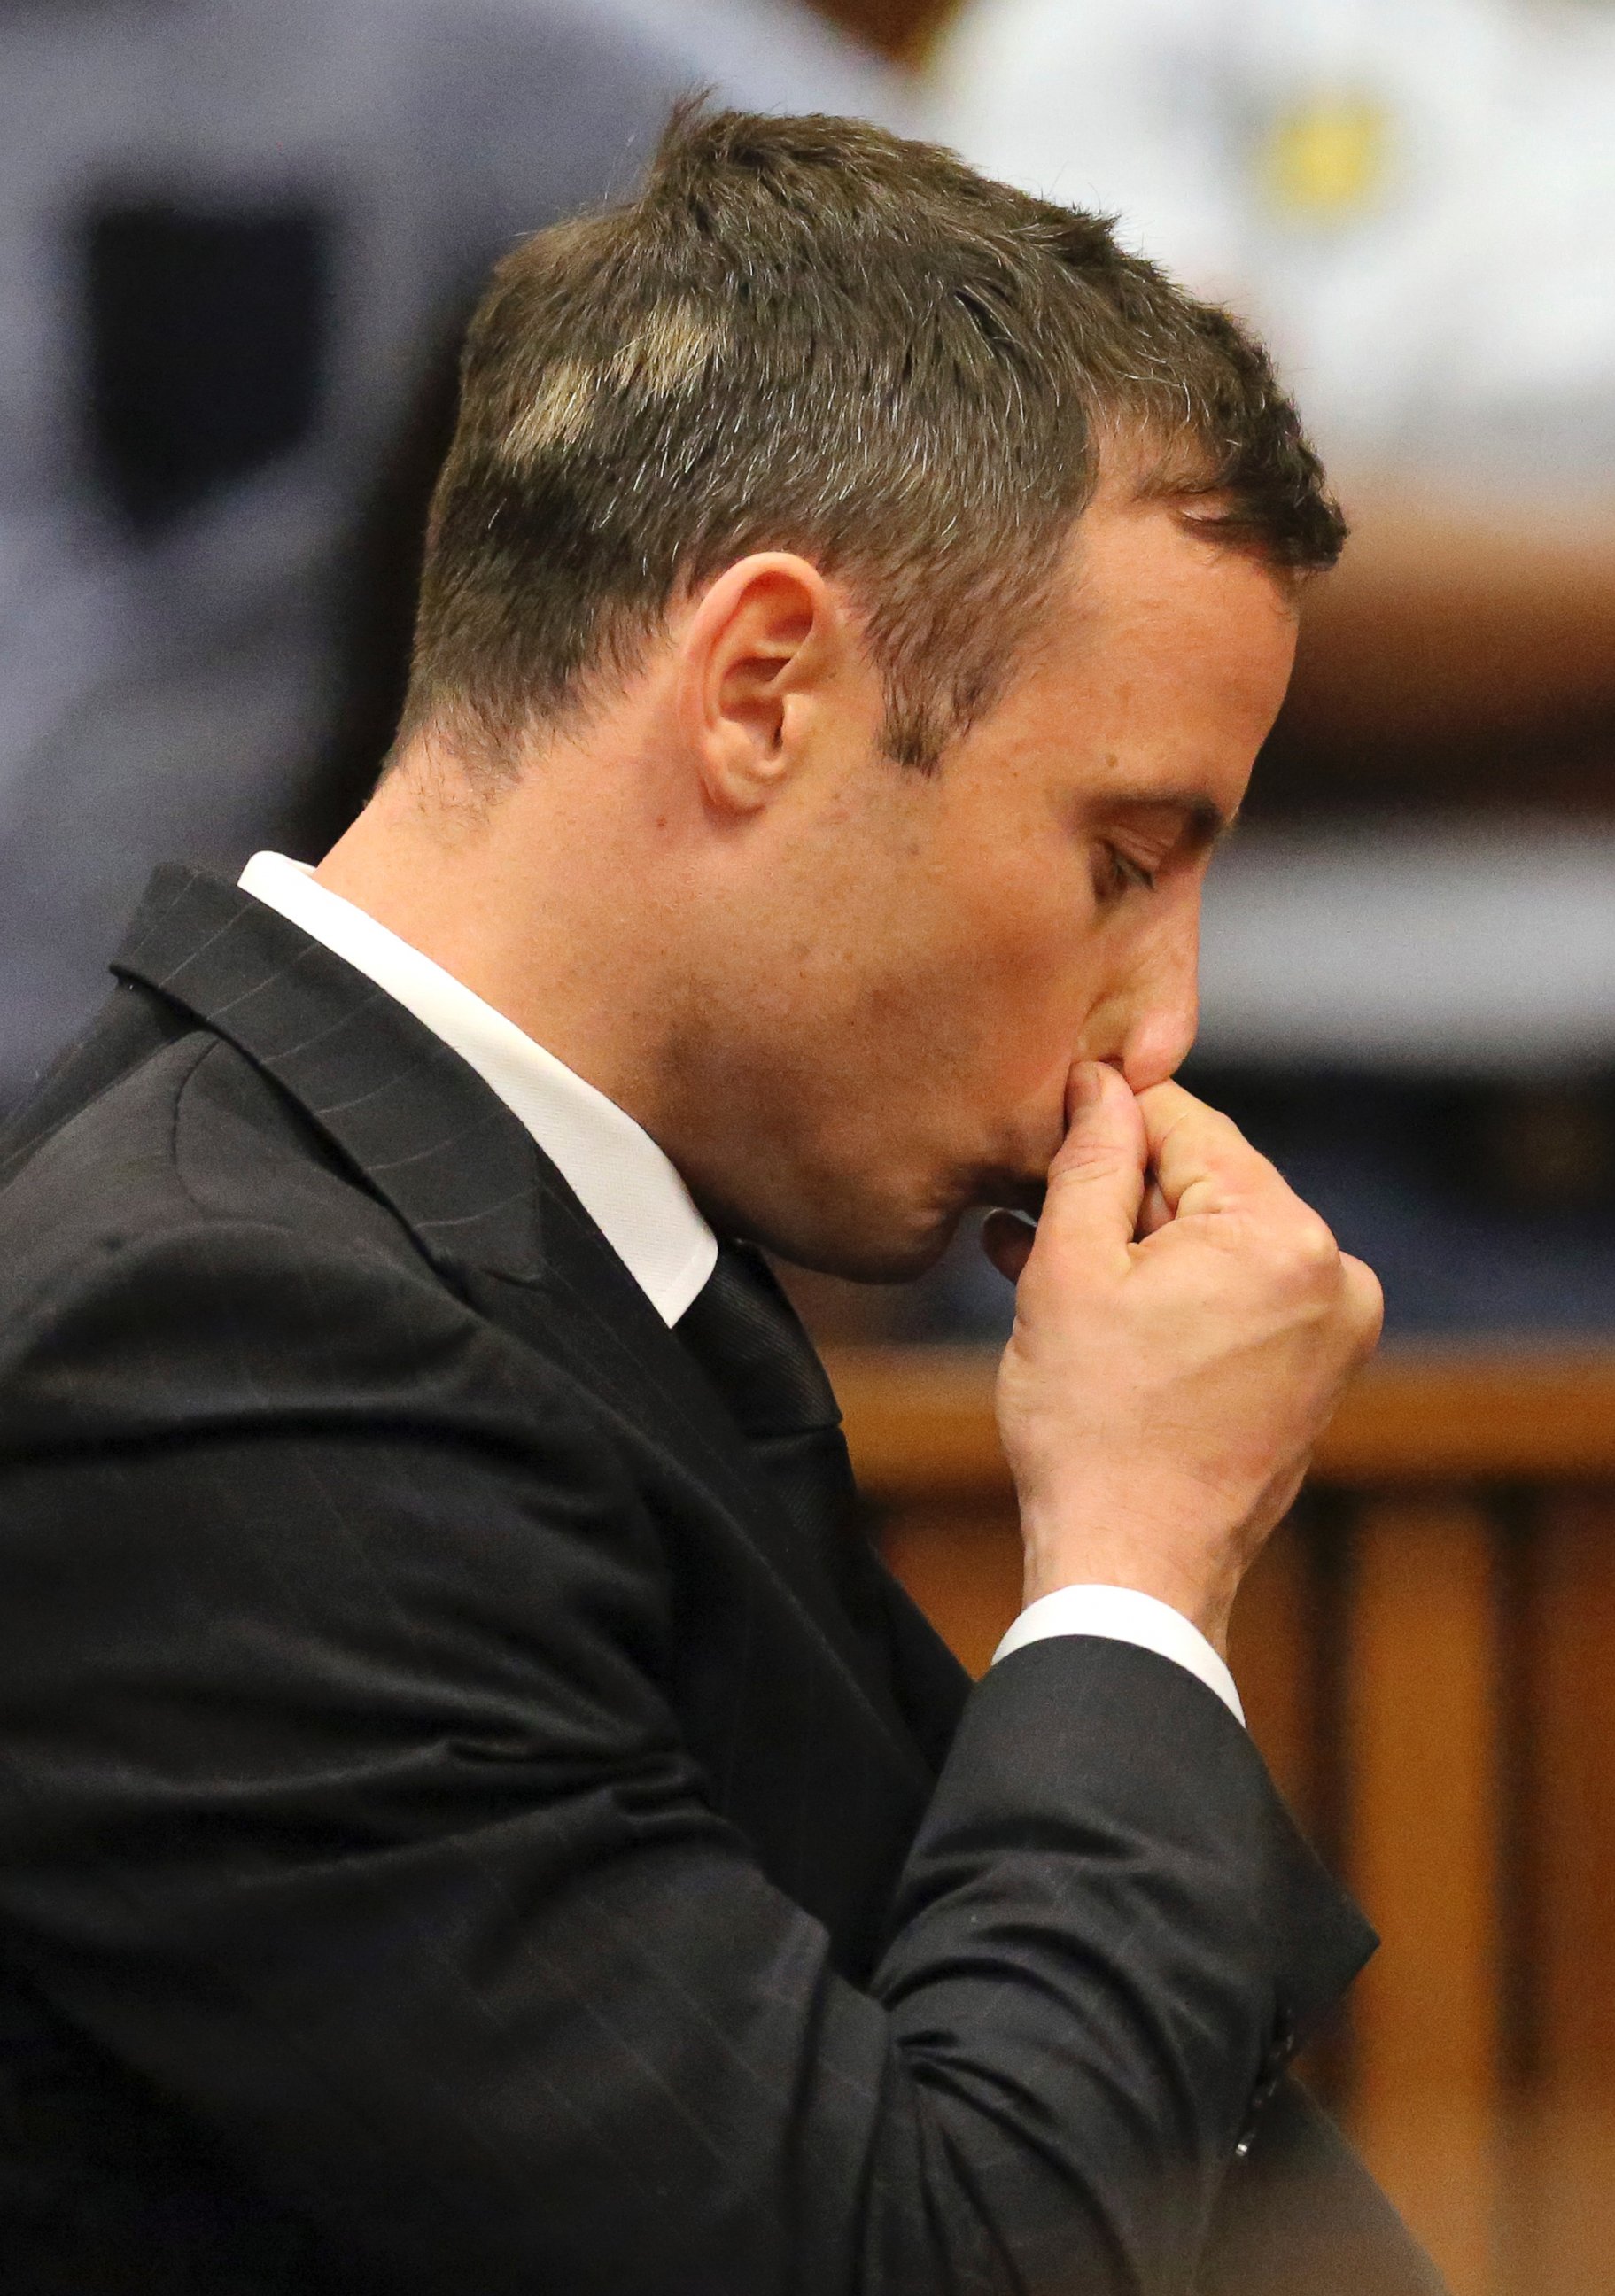 PHOTO: Oscar Pistorius, center, gestures after he was sentenced in court in Pretoria, South Africa, Oct. 21, 2014.